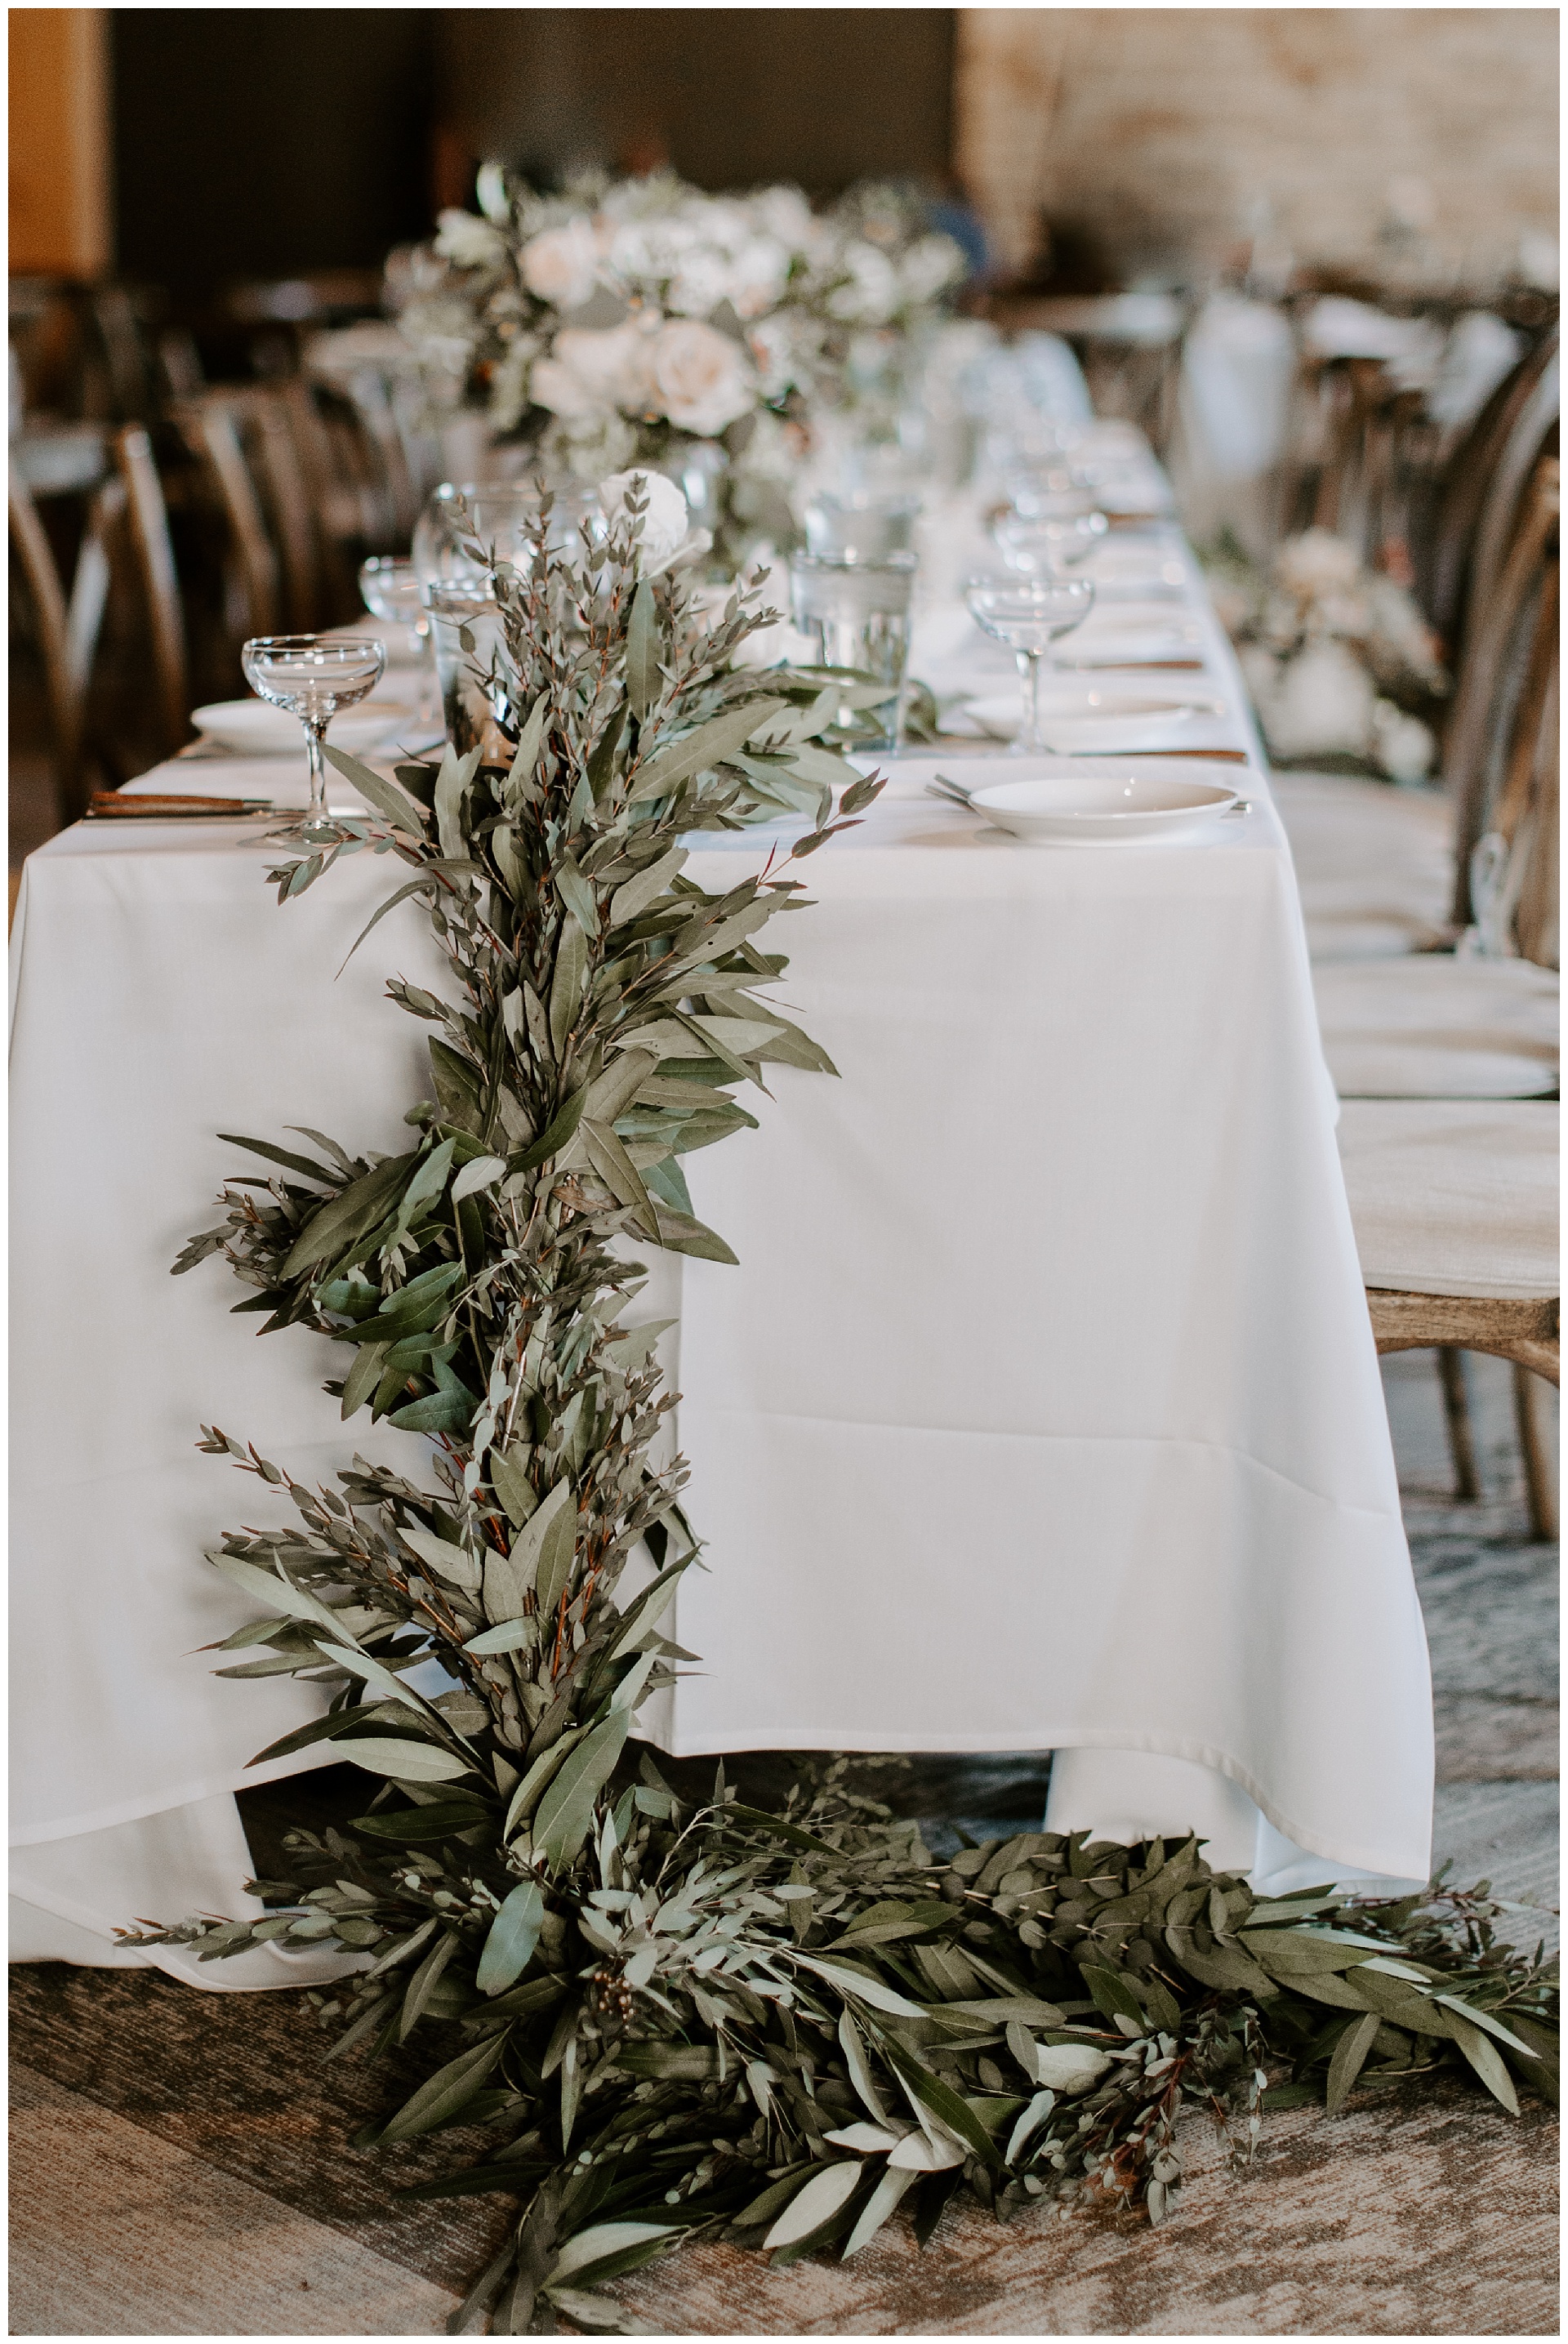 Details at the Hewing Hotel. Flowers by Maven Events 